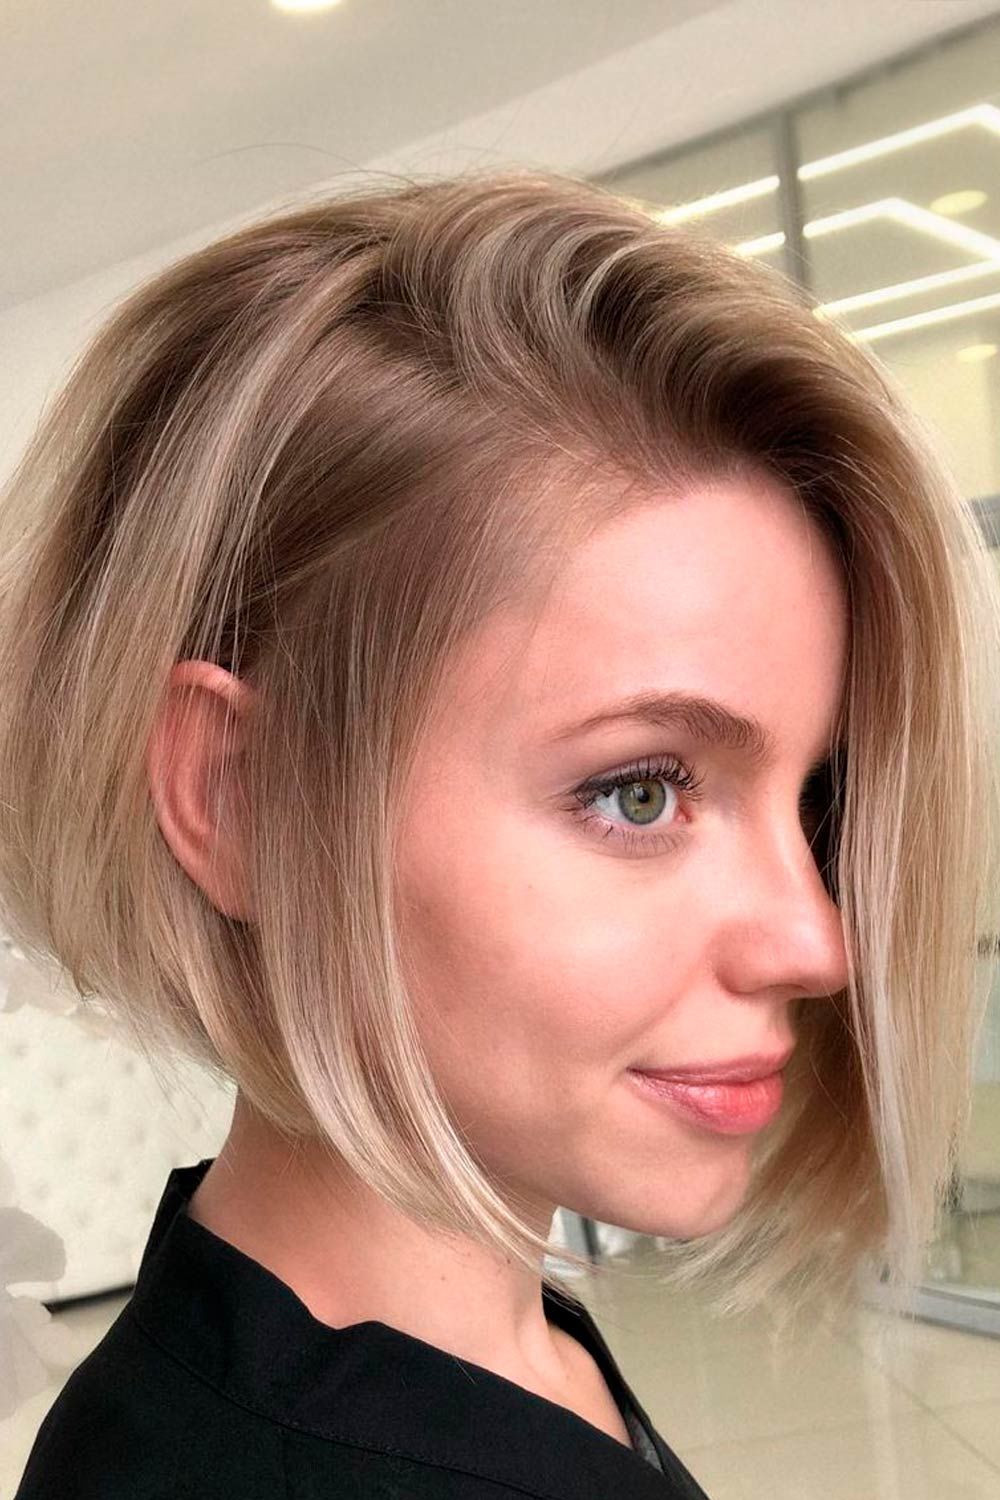 Bob Haircuts, short afro hairstyles for round faces, short edgy hairstyles for women with round faces, short choppy hairstyles for round faces